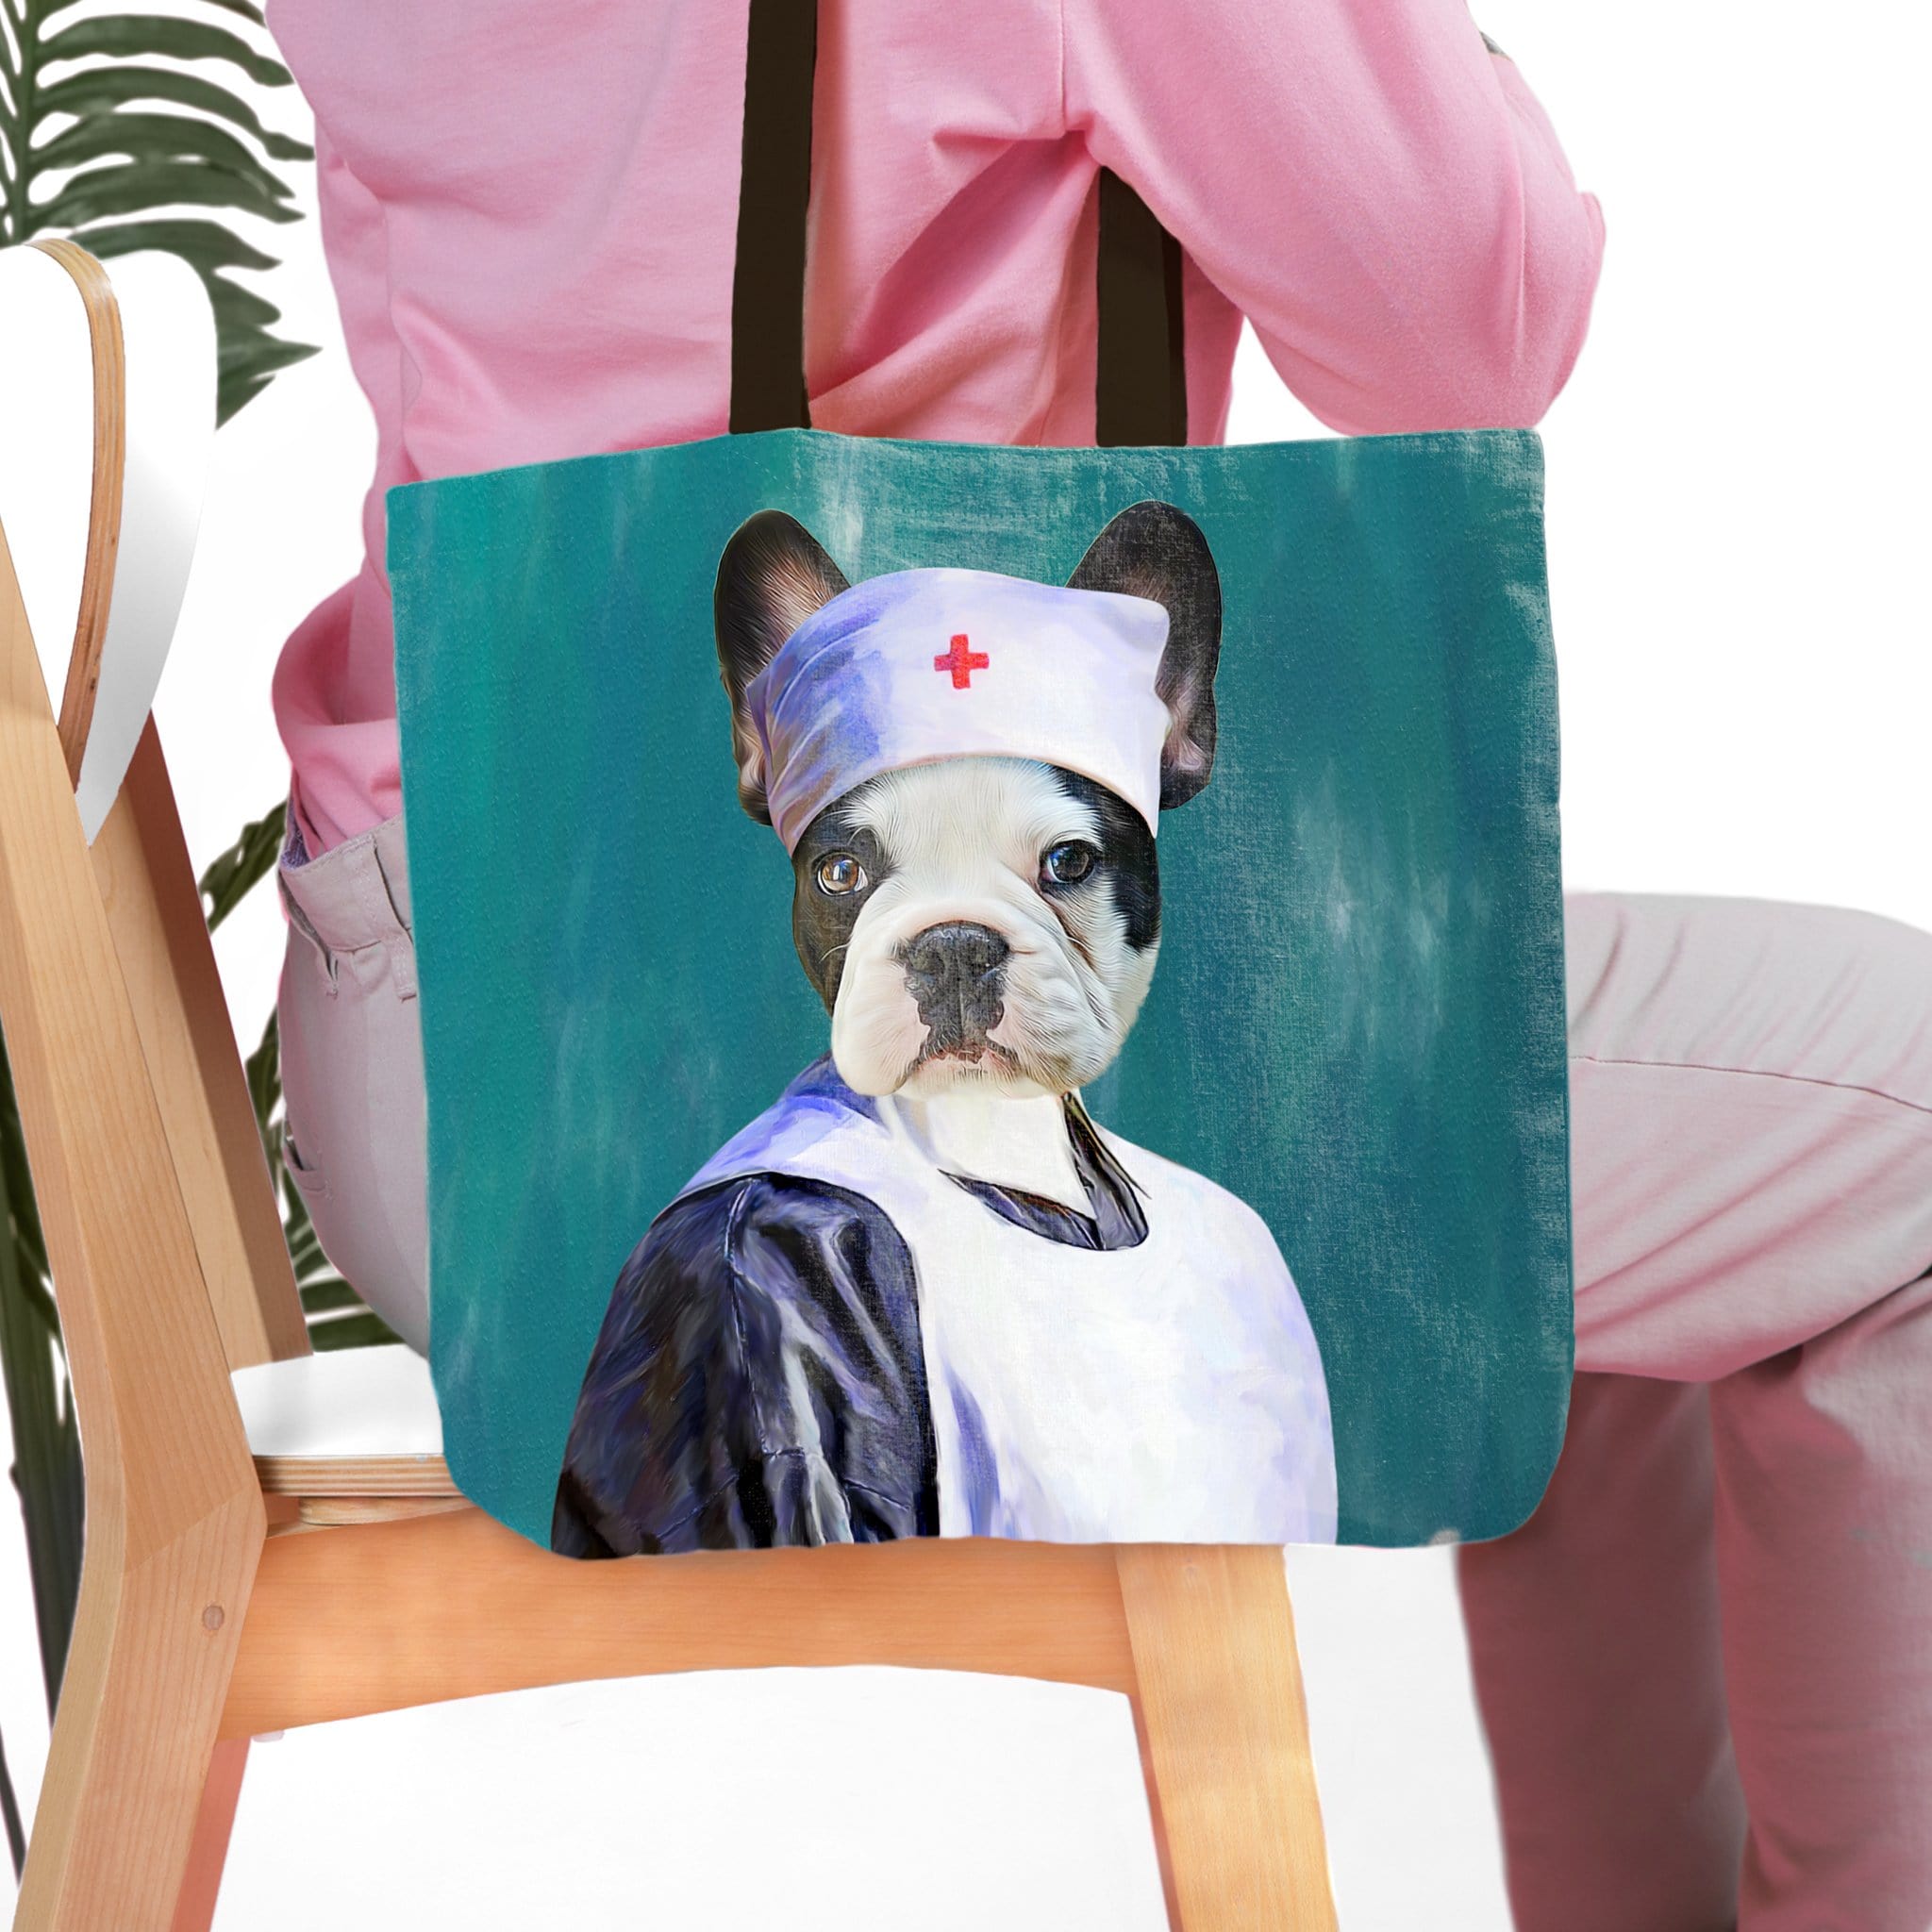 &#39;The Nurse&#39; Personalized Tote Bag